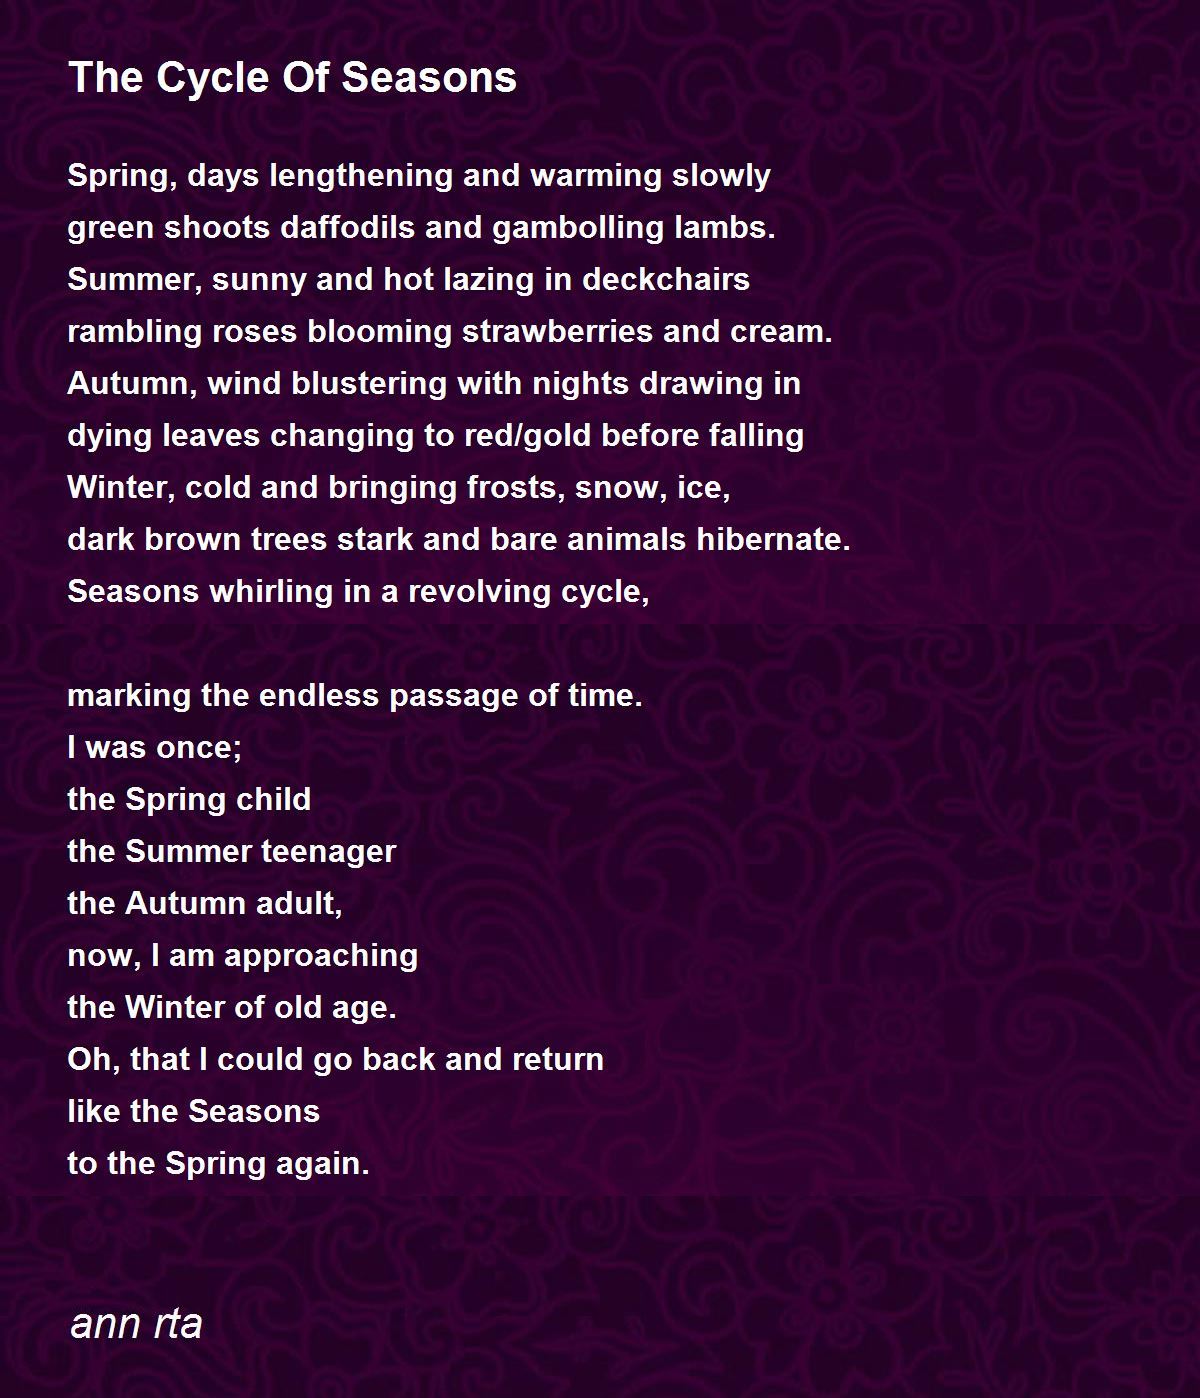 The Cycle Of Seasons By Ann Rta The Cycle Of Seasons Poem